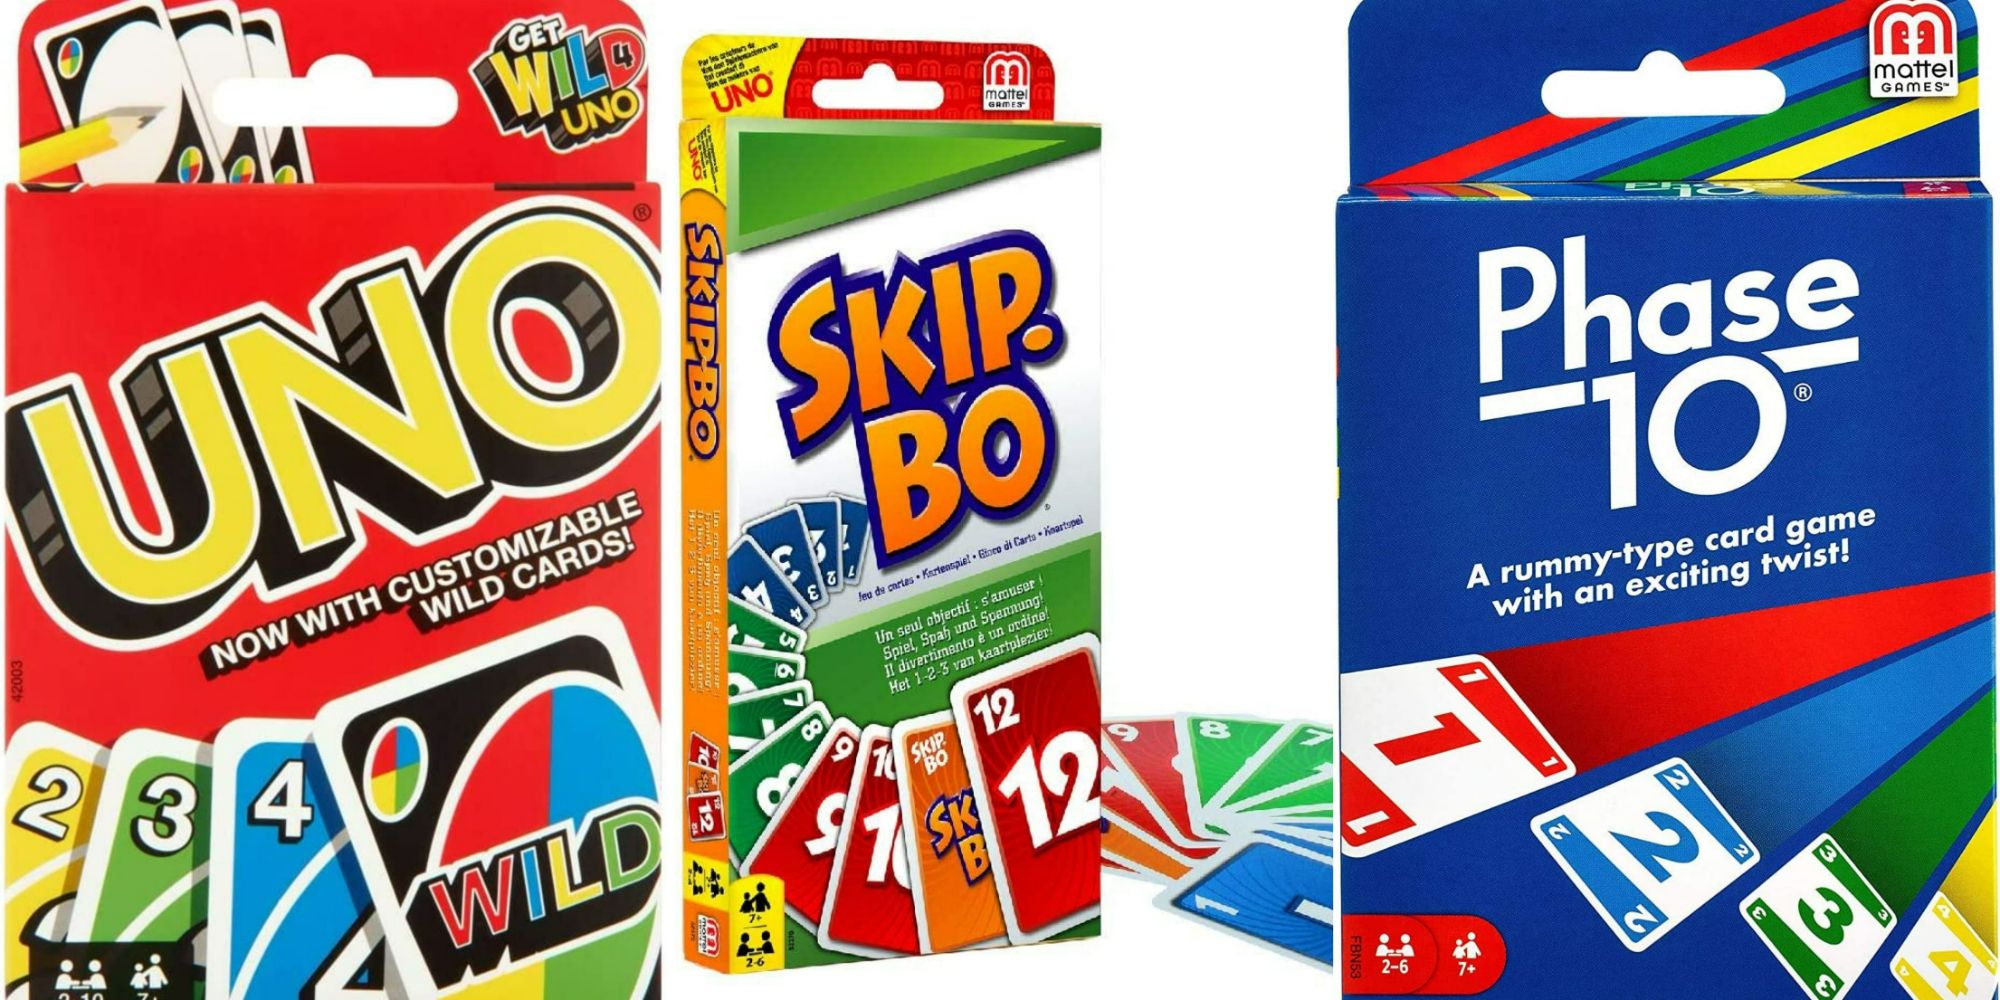 Image with games boxes for Uno, Skip-Bo, and Phase 10